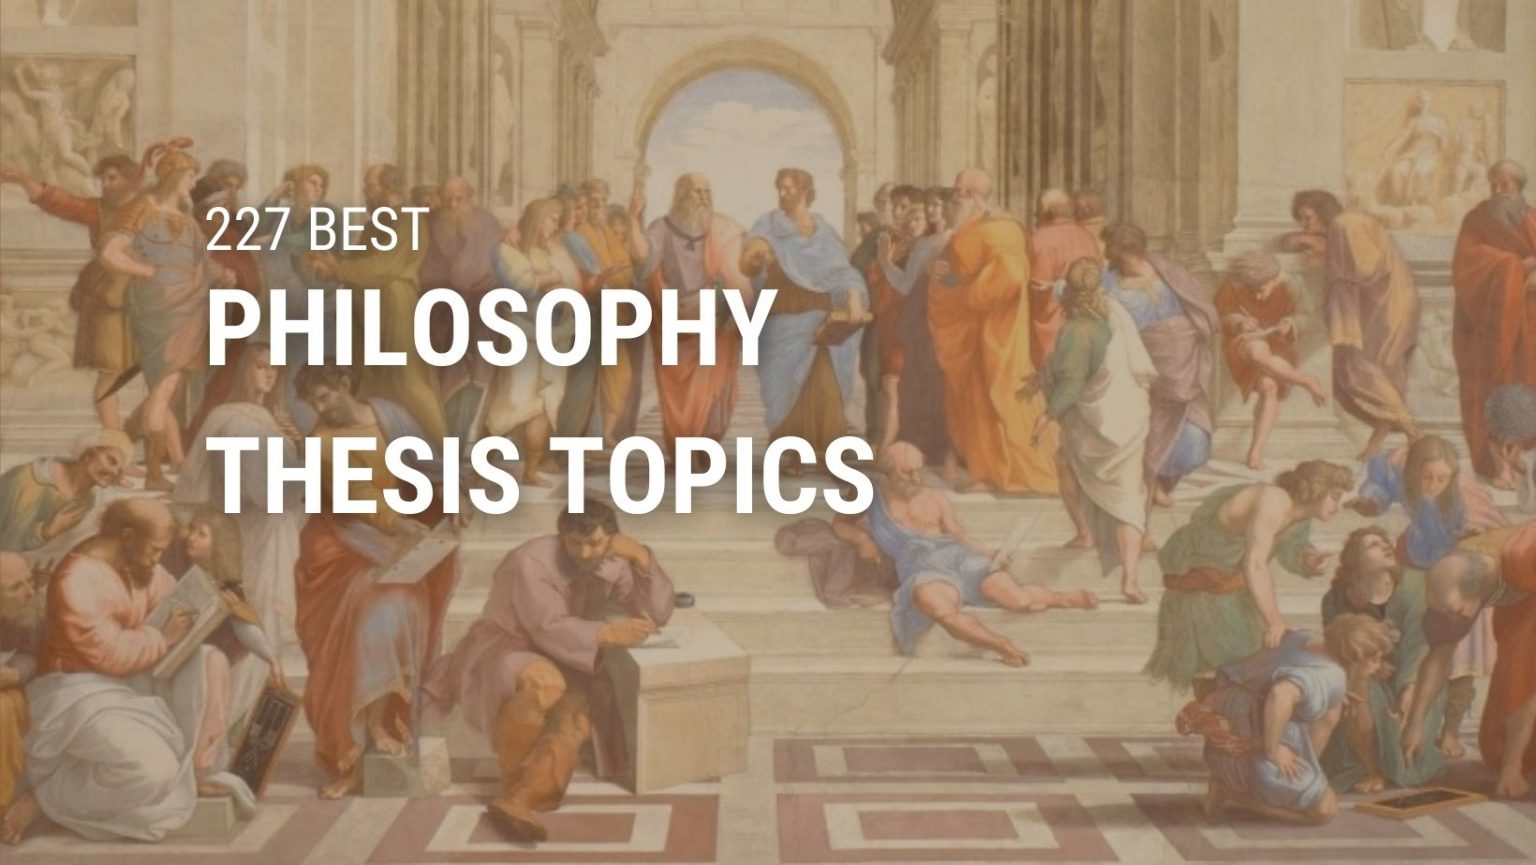 research topic about philosophy